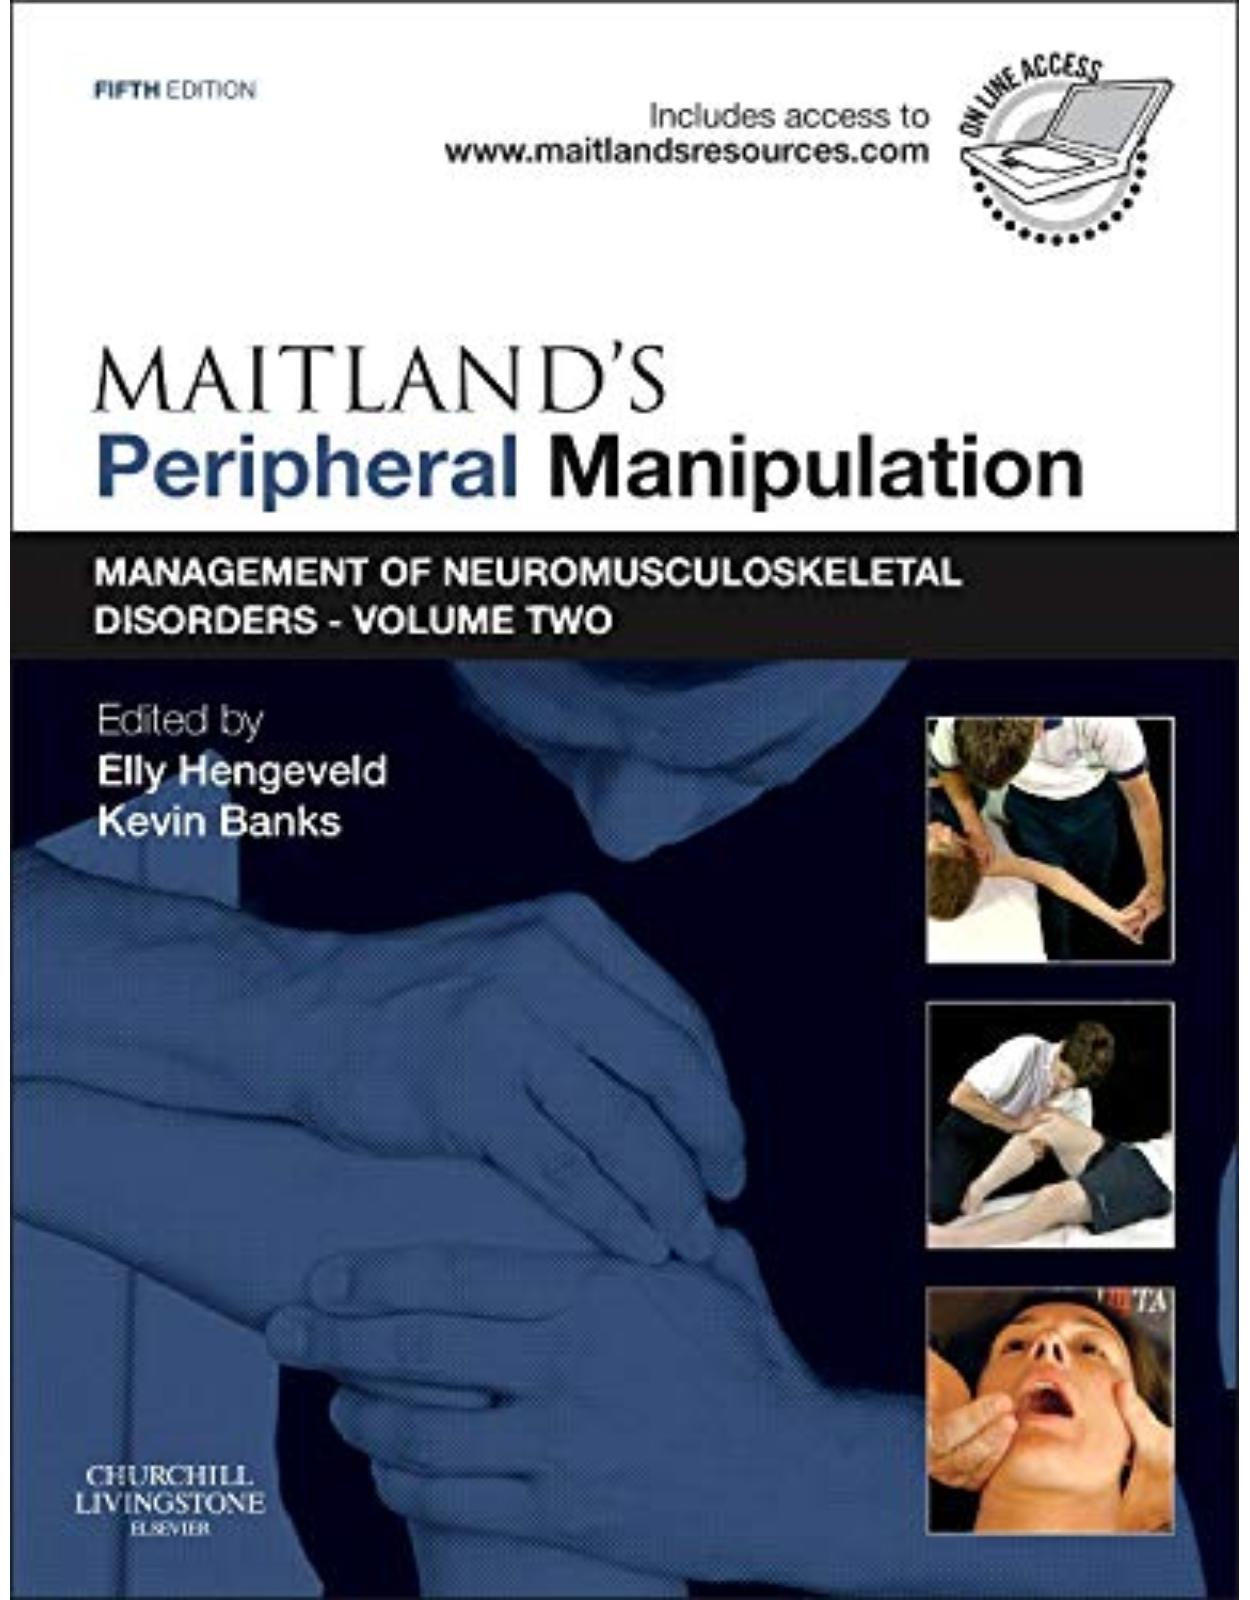 Maitland's Peripheral Manipulation: Management of Neuromusculoskeletal Disorders - Volume 2